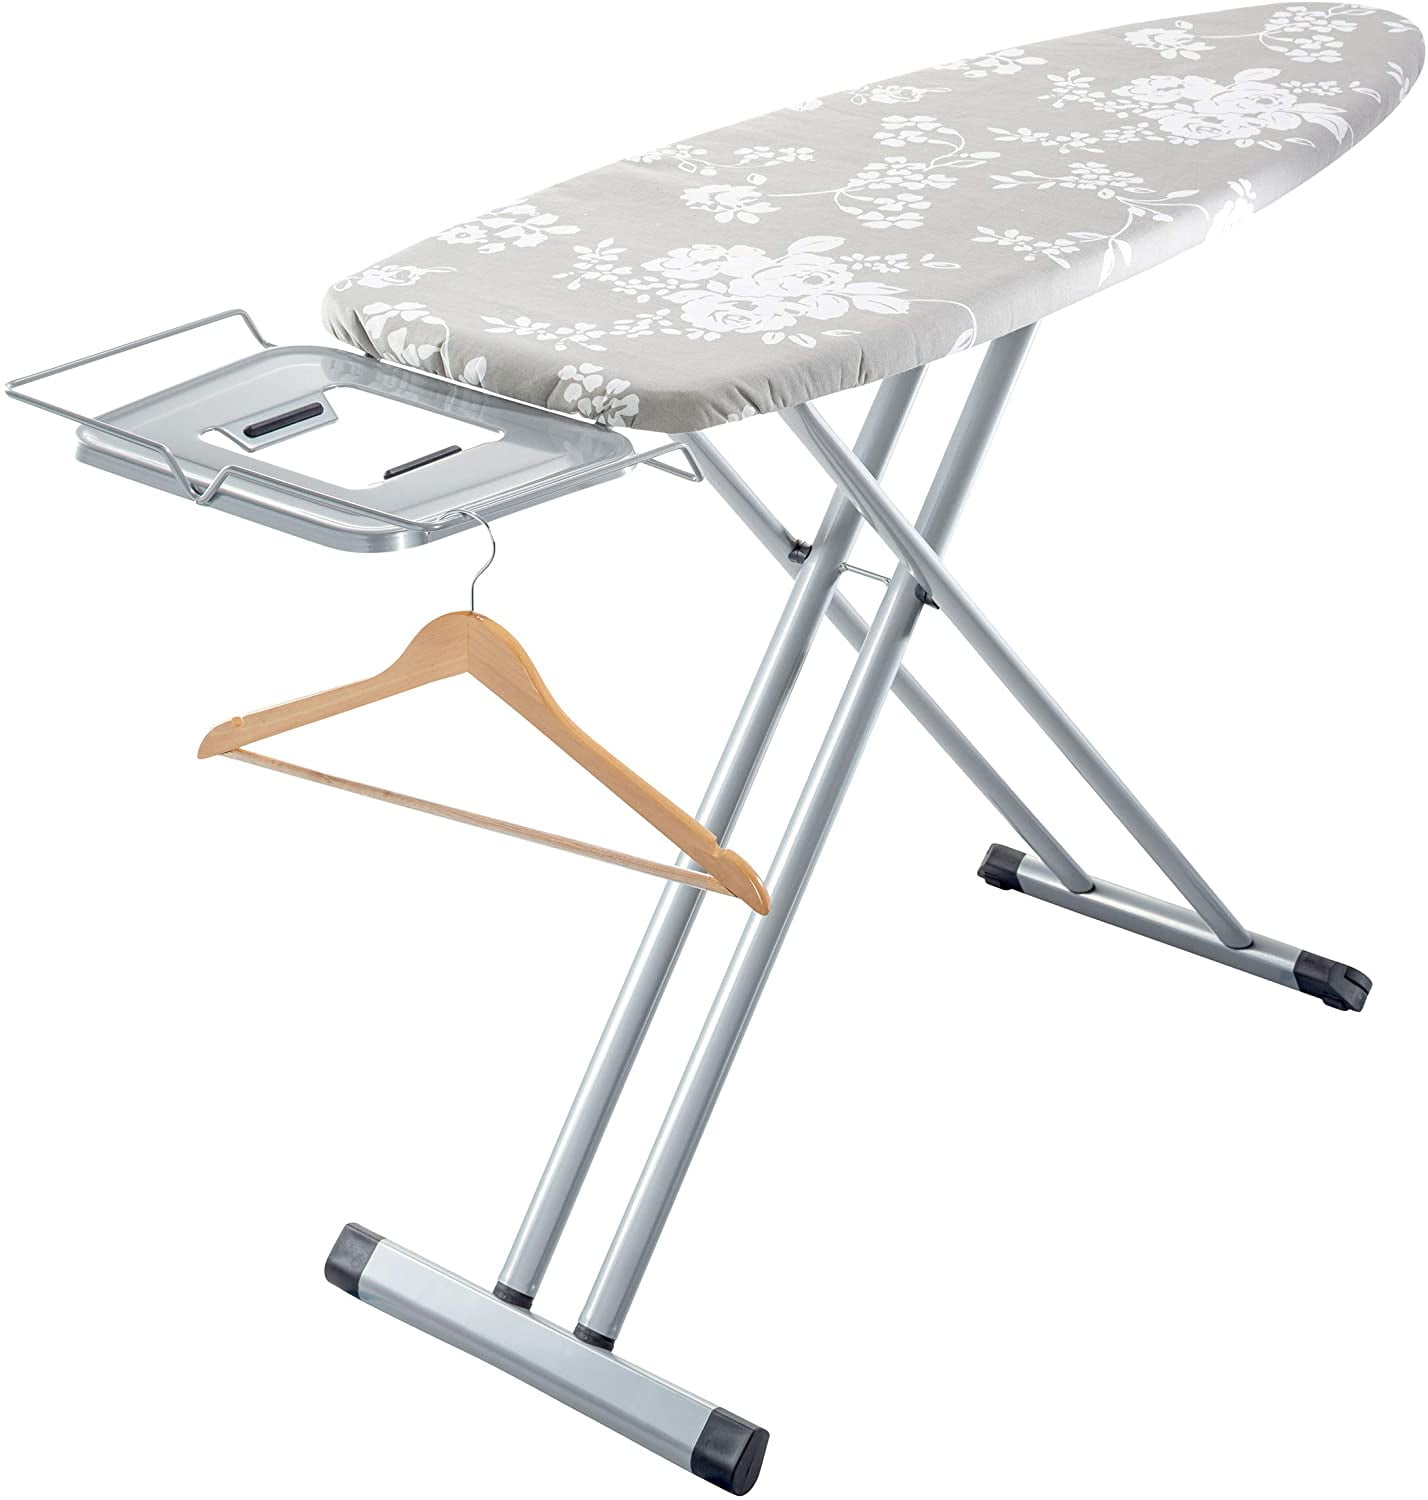 Steam Iron RestStorage Tray fo Bartnelli Adjustable Ironing Board with Cover 